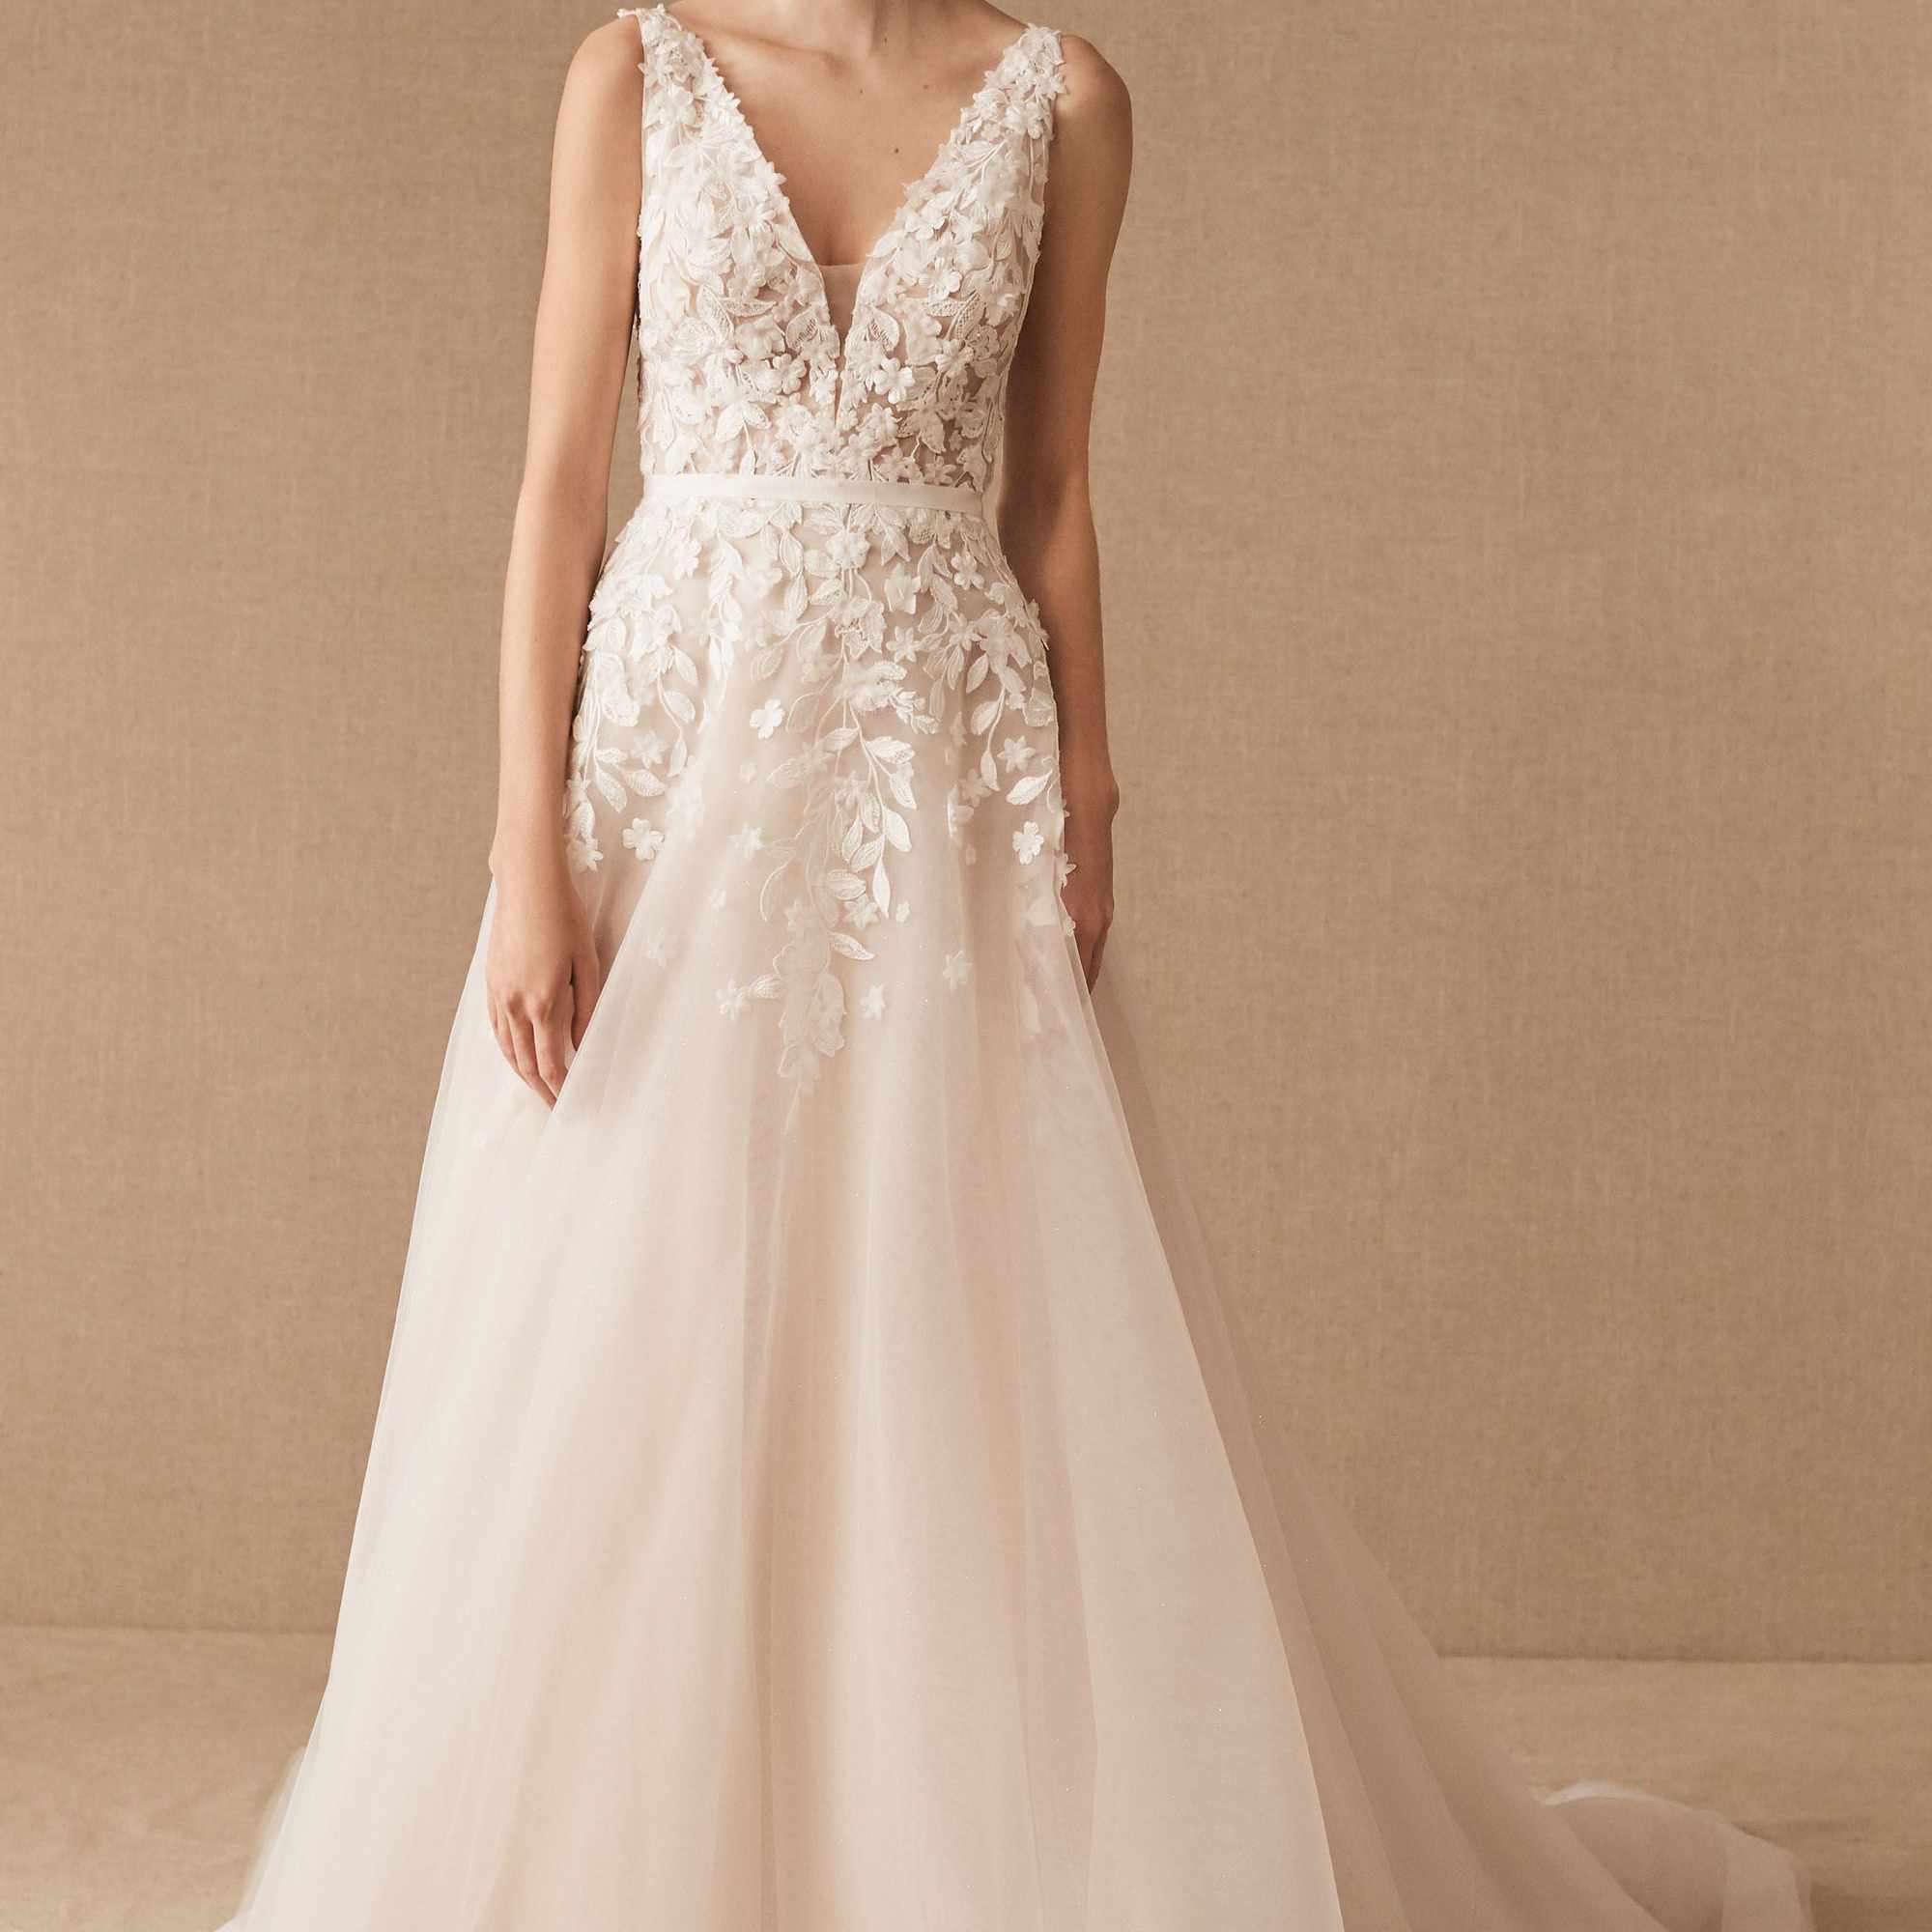 The 20 Best Places to Buy Wedding Dresses Online of 2020